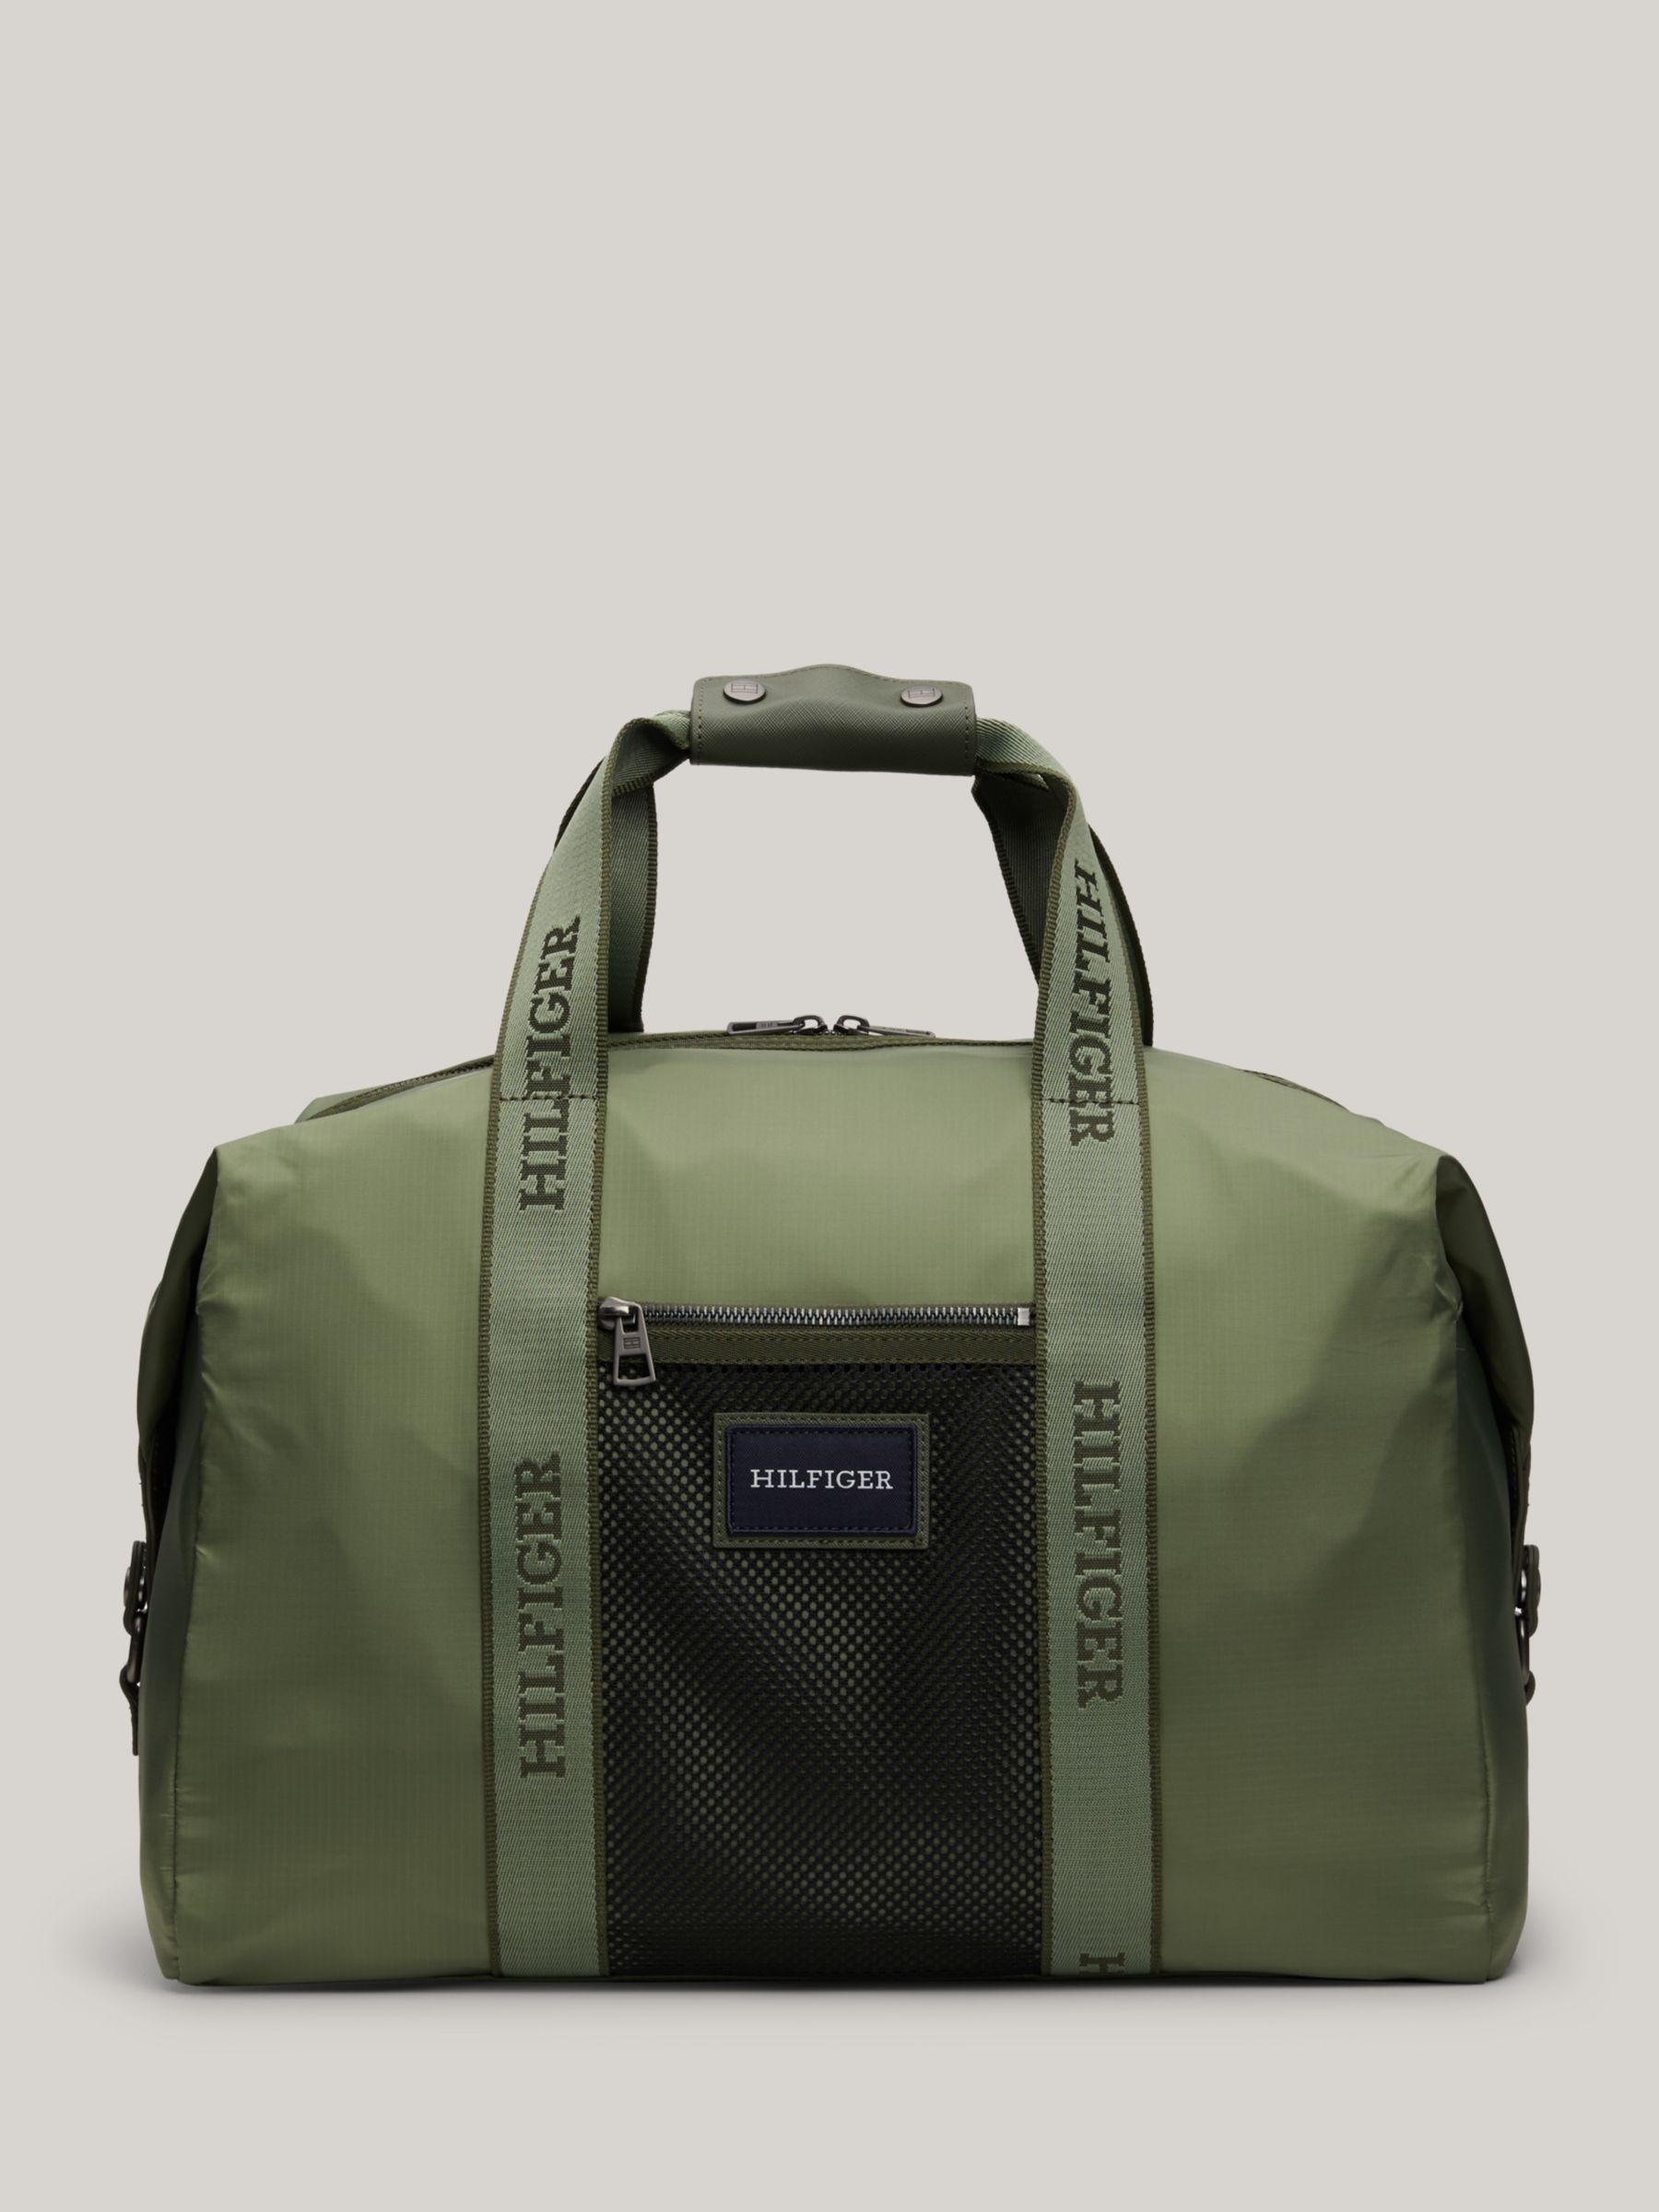 Tommy Hilfiger Summer Duffle Bag, Green, One Size